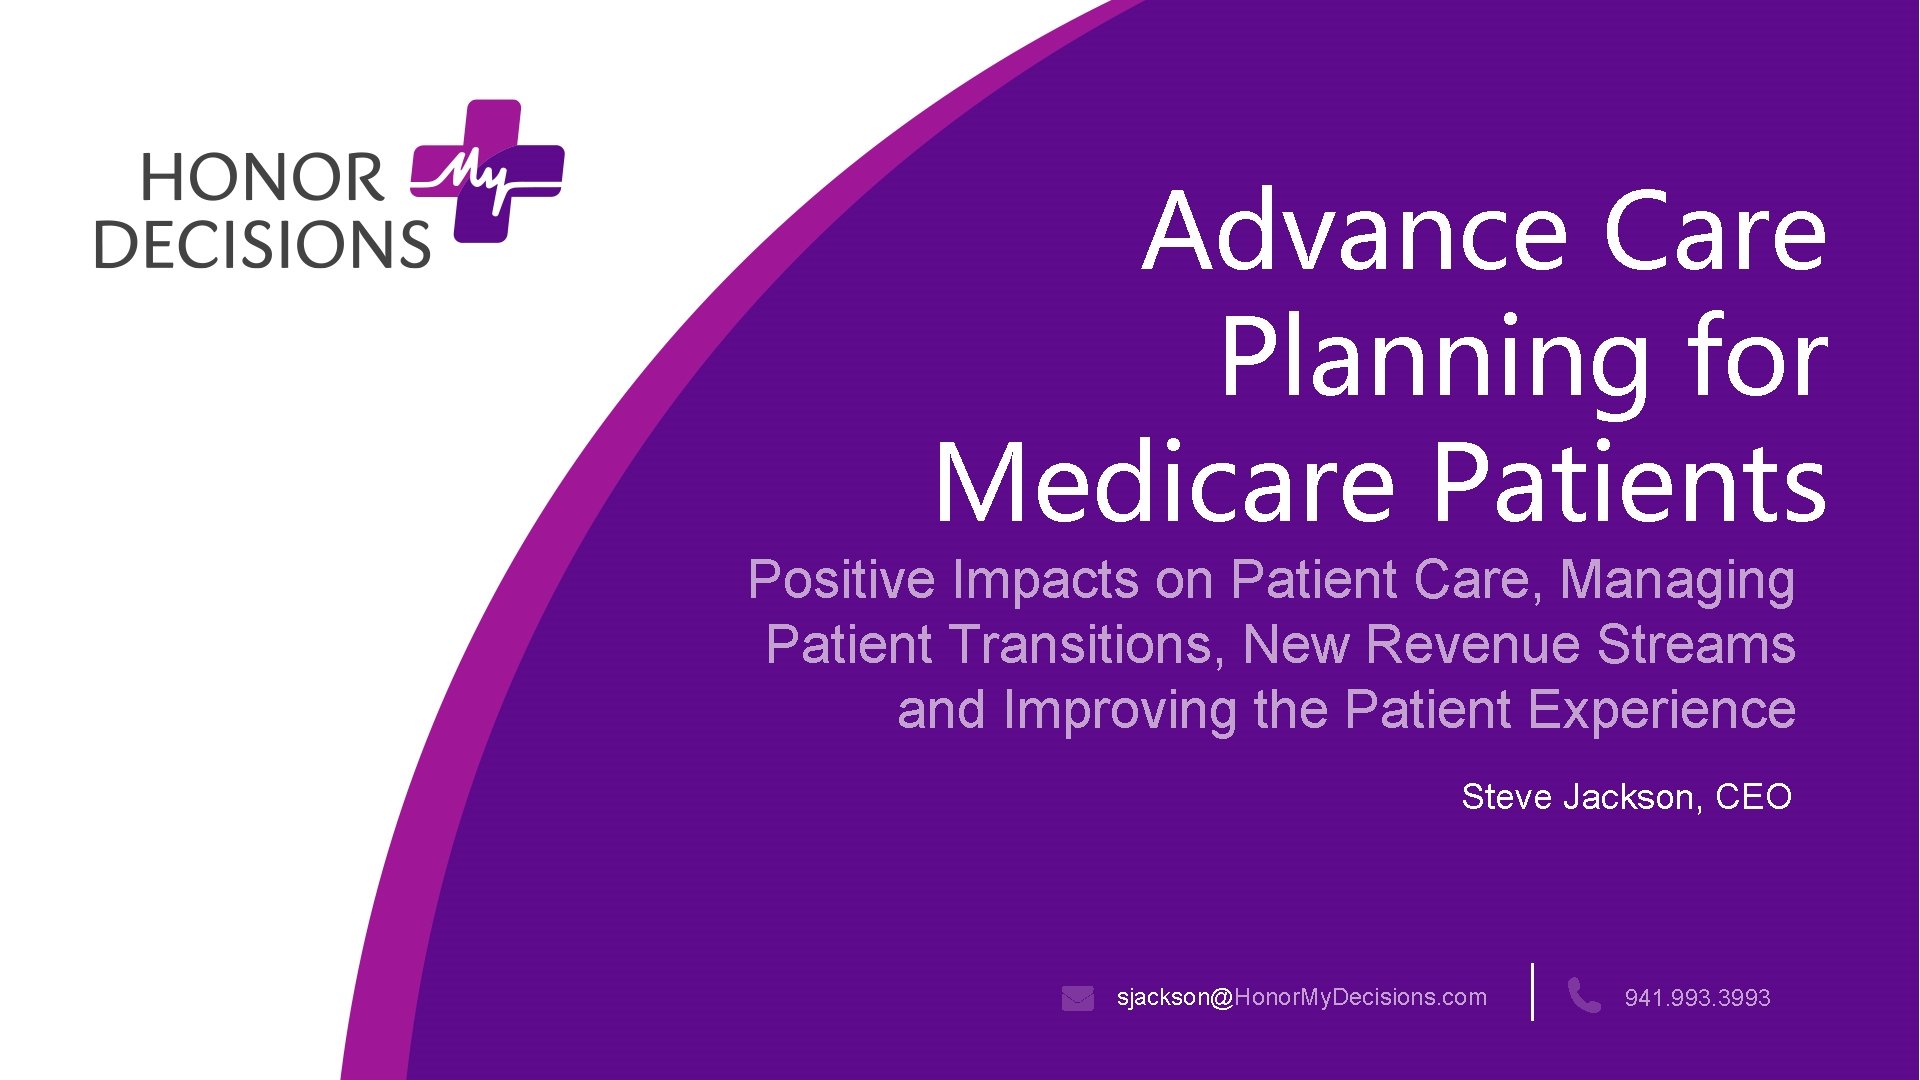 Advance Care Planning for Medicare Patients Positive Impacts on Patient Care, Managing Patient Transitions,